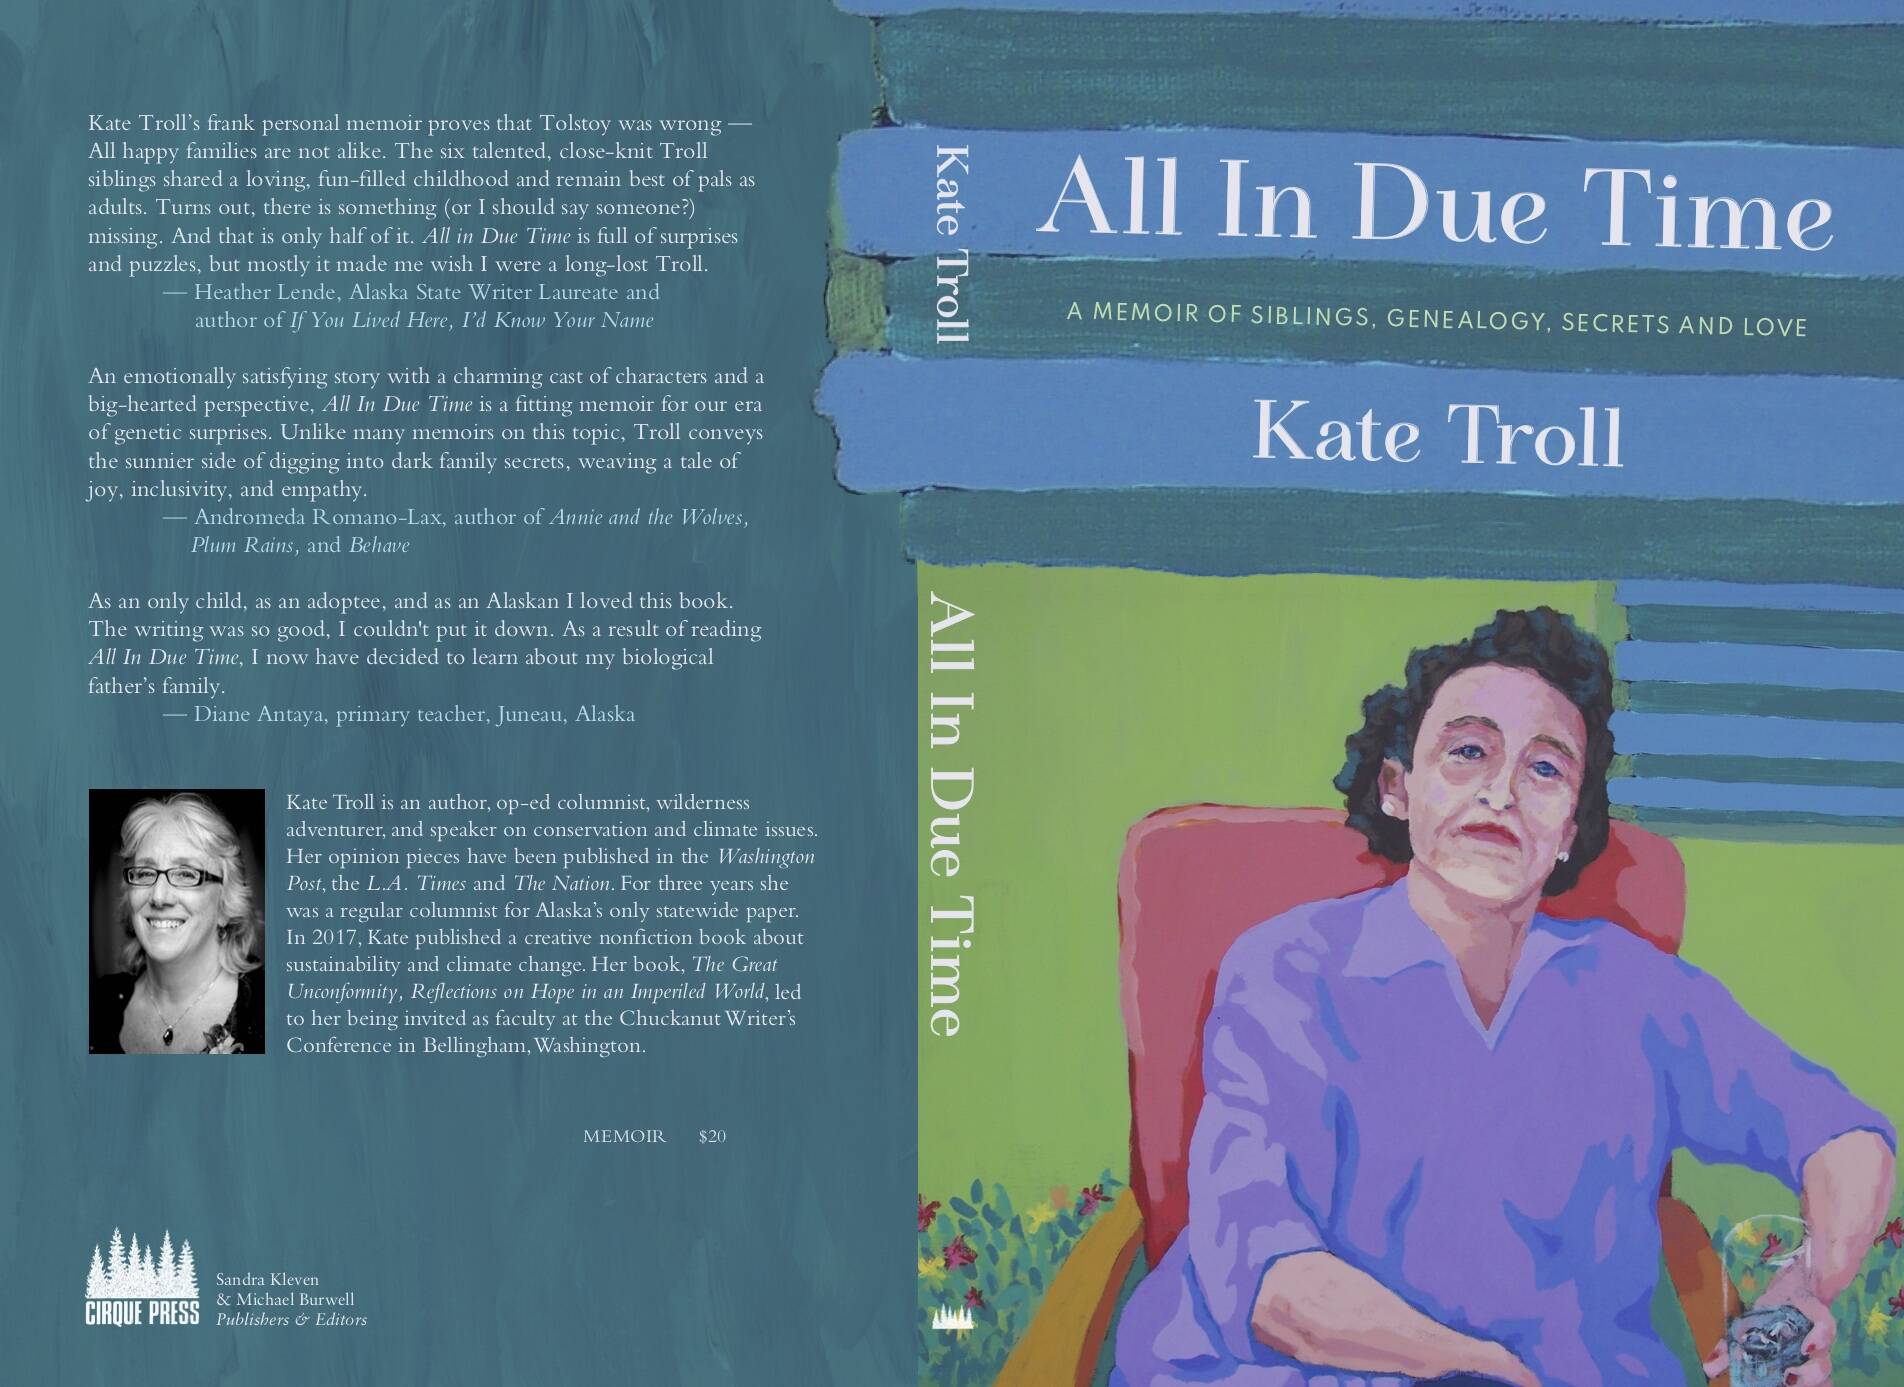 This image shows the cover of Kate Troll’s new book, “All In Due Time: A Memoir of Siblings, Genealogy, Secrets and Love.” (Cirque Press)